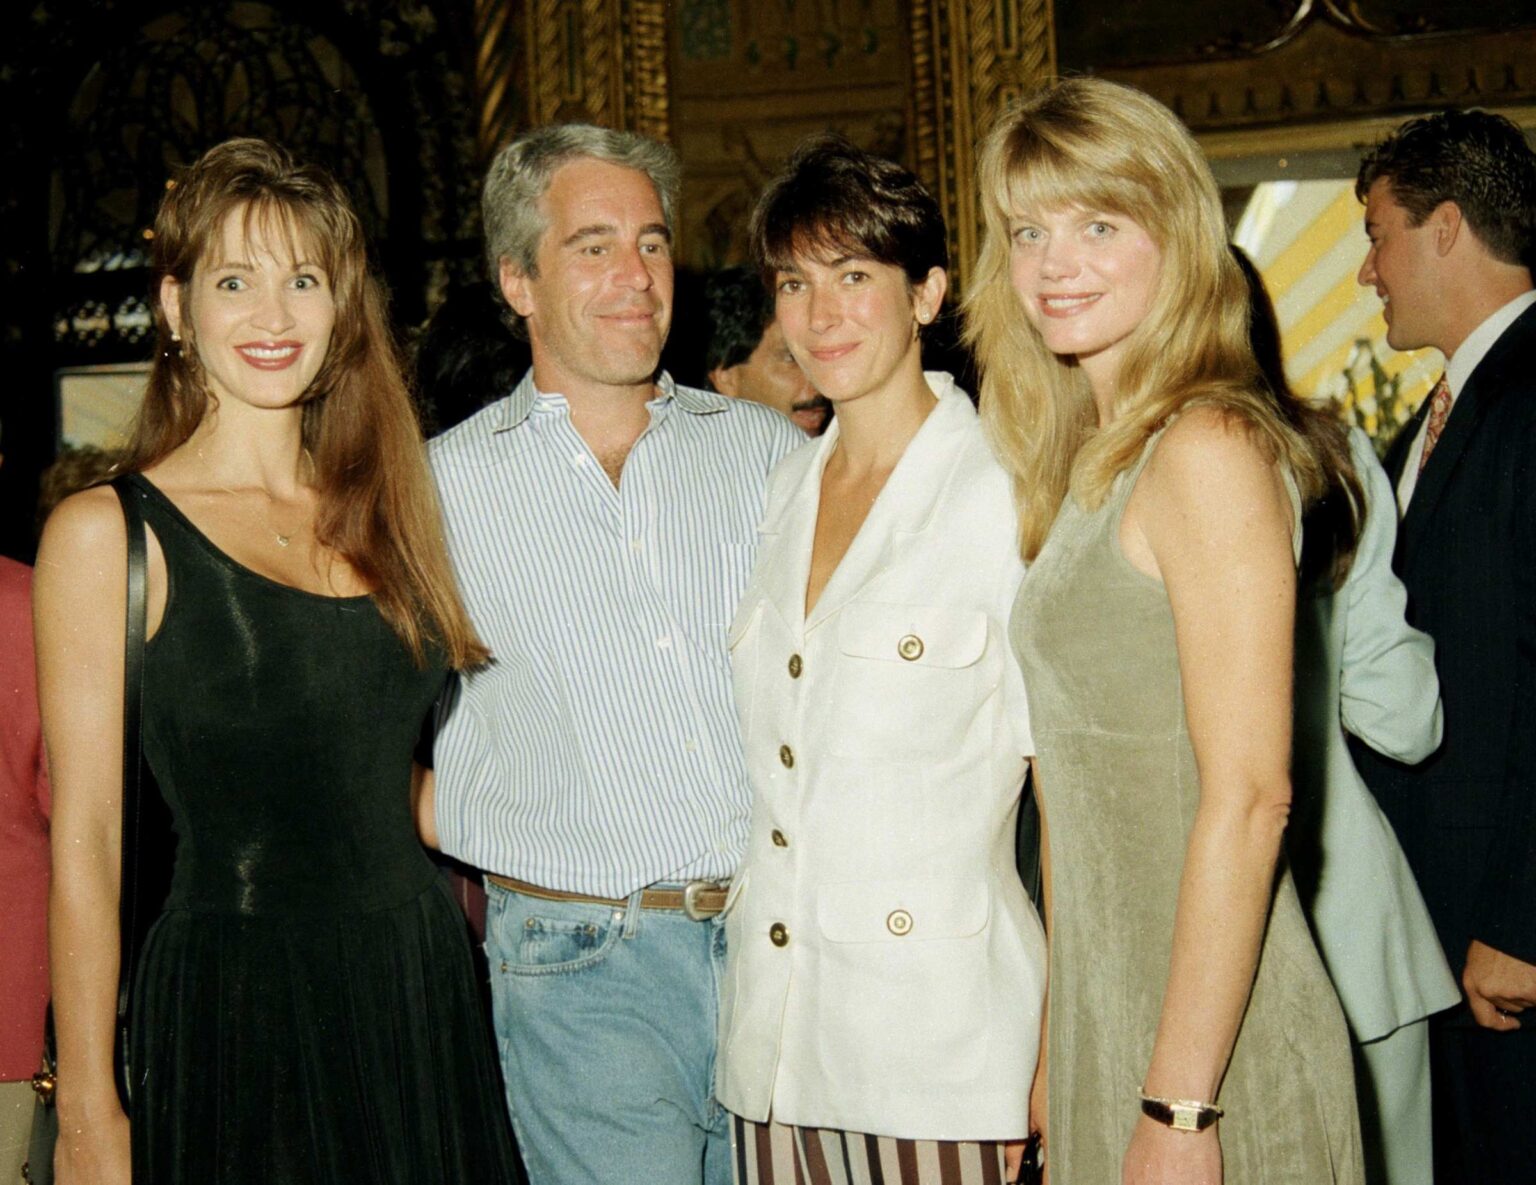 Ghislaine Maxwell has been charged with aiding Jeffrey Epstein in his sexual abuse. But how did Maxwell recruit these young girls?